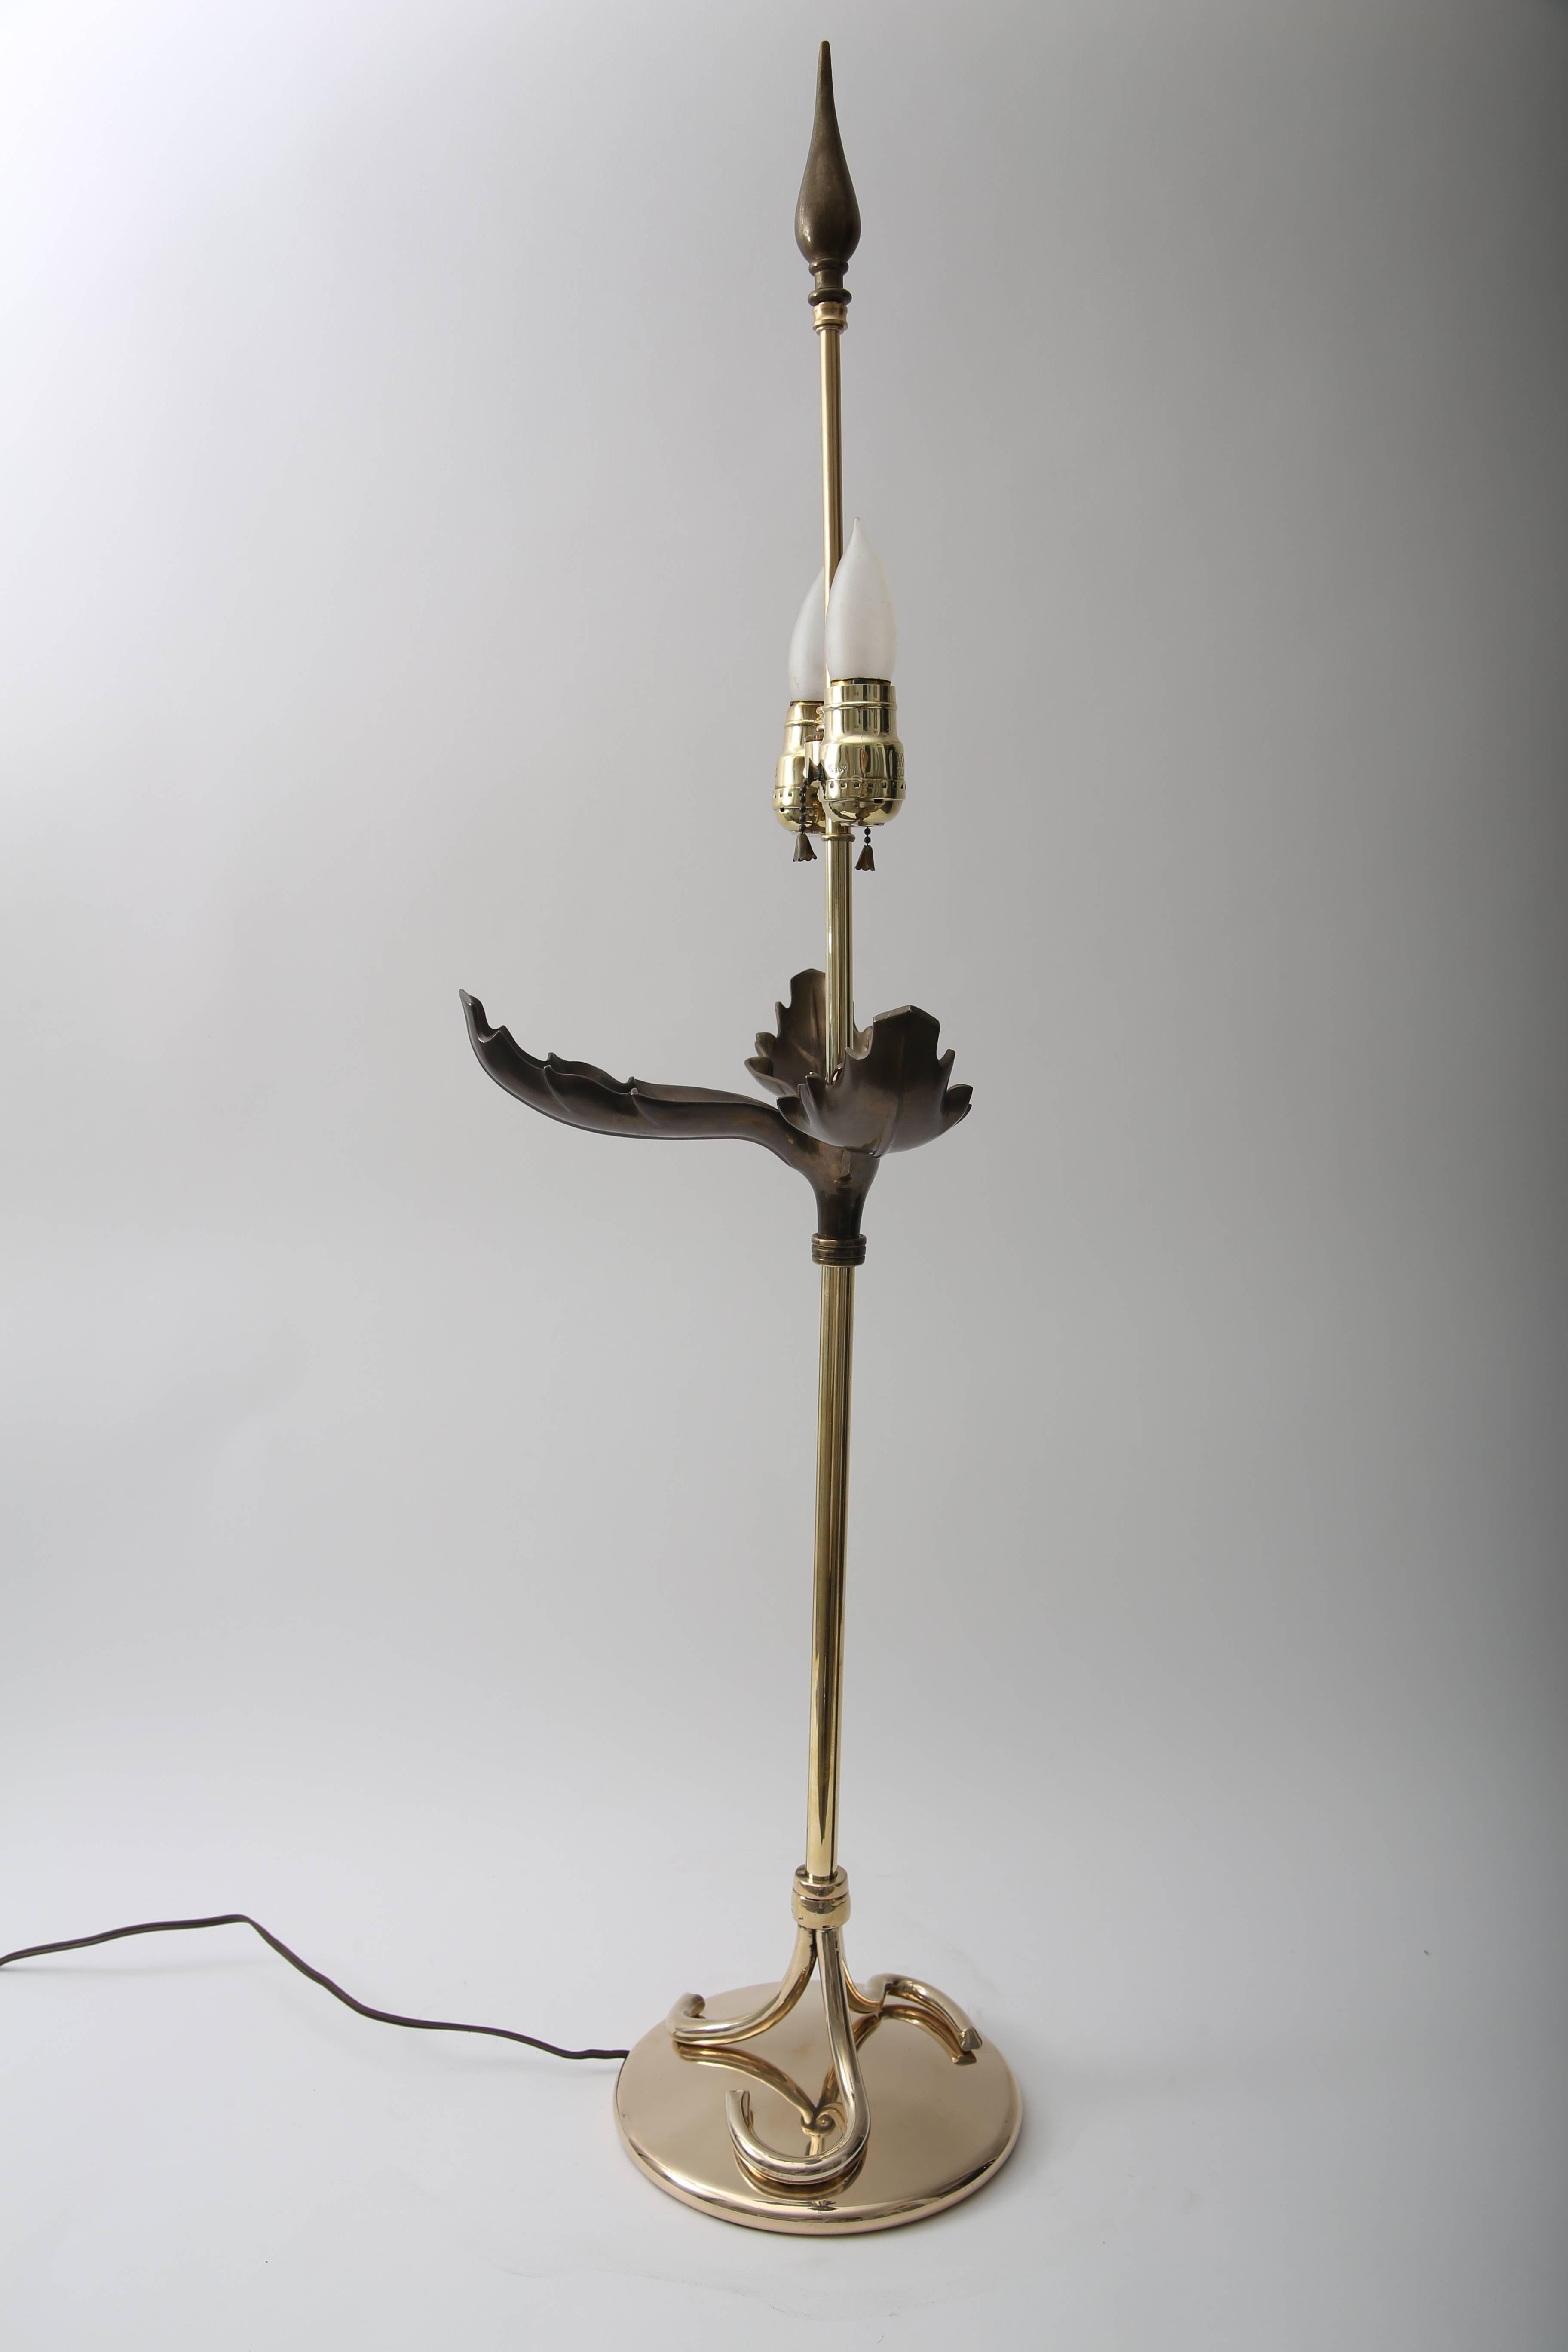 Organic Modern  Table Lamp in Polished and Antique Brass with a Mica Shade For Sale